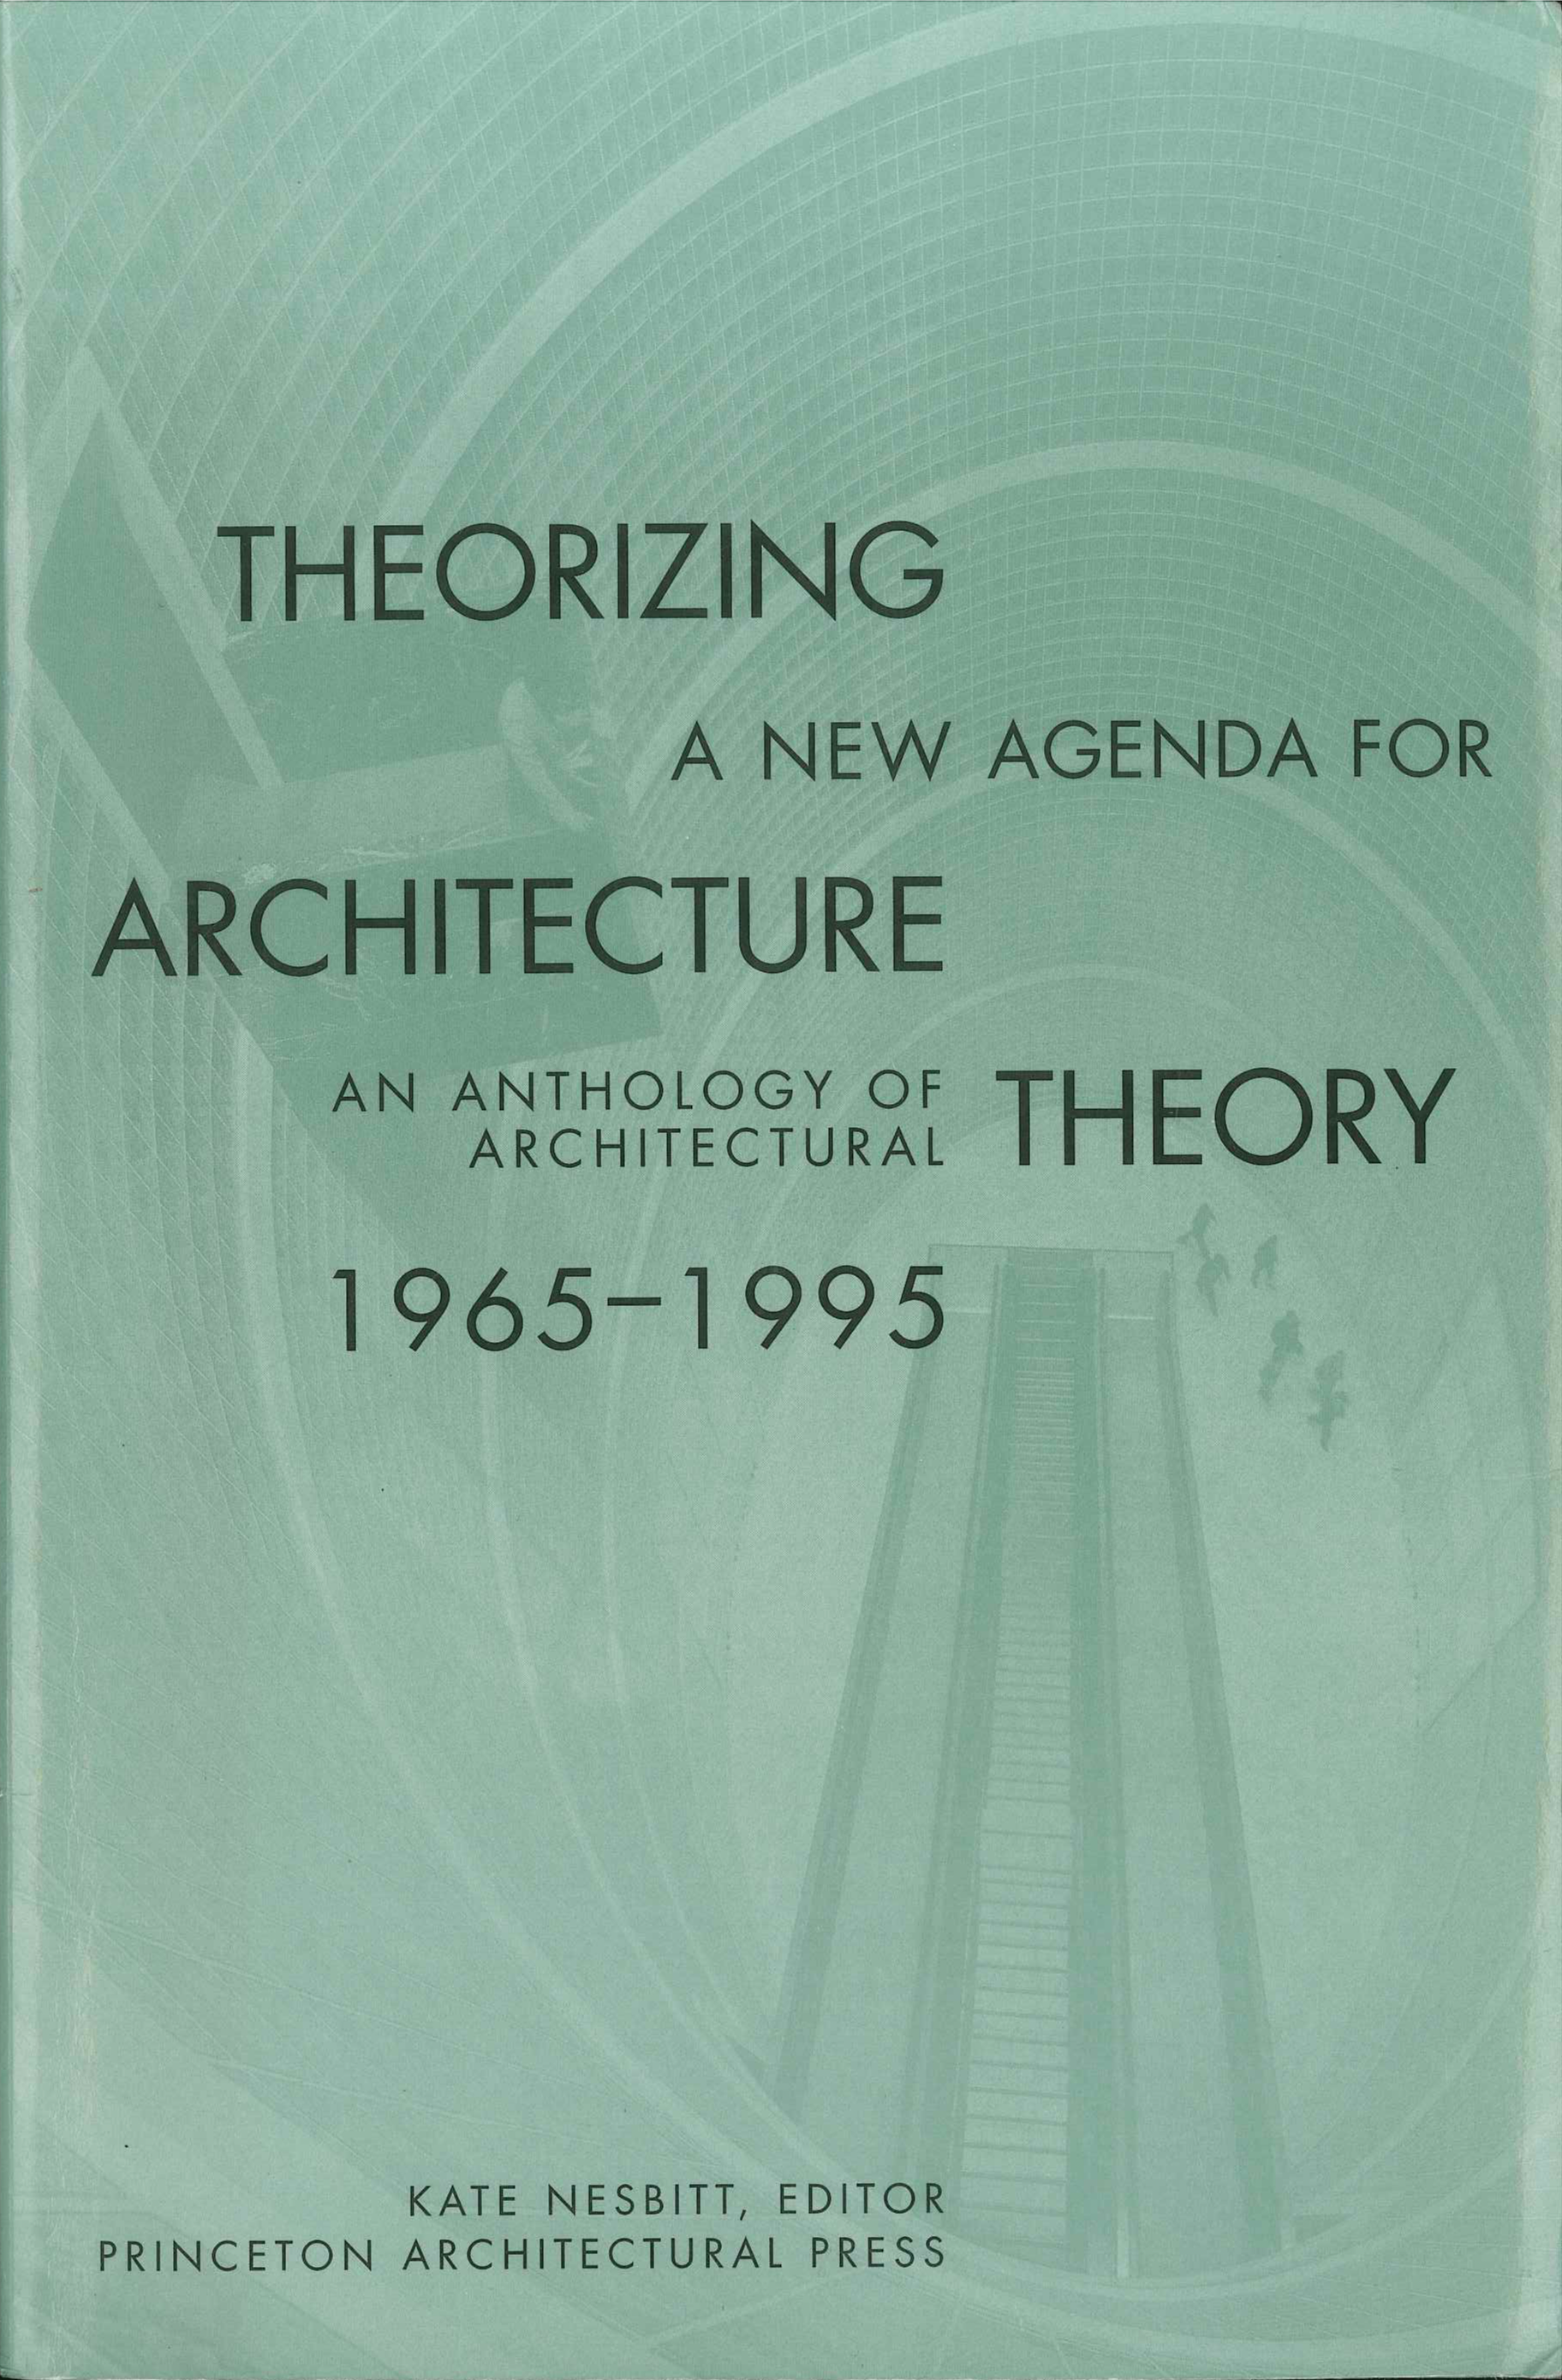 Theorizing A New Agenda For Architecture 1965-1995